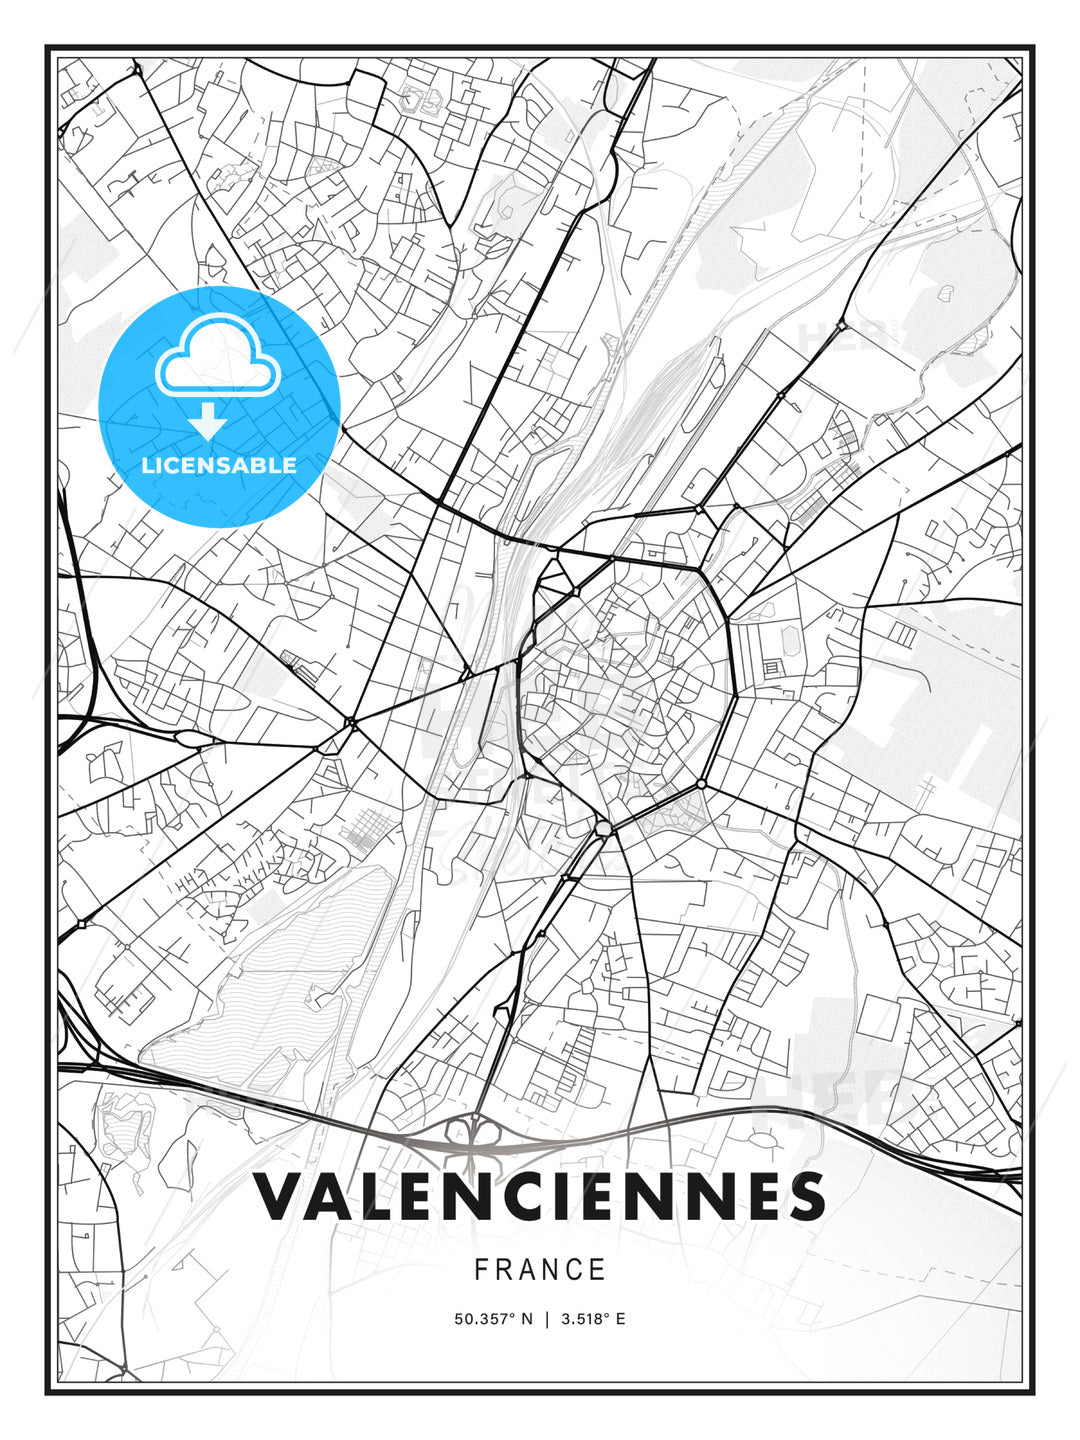 Valenciennes, France, Modern Print Template in Various Formats - HEBSTREITS Sketches